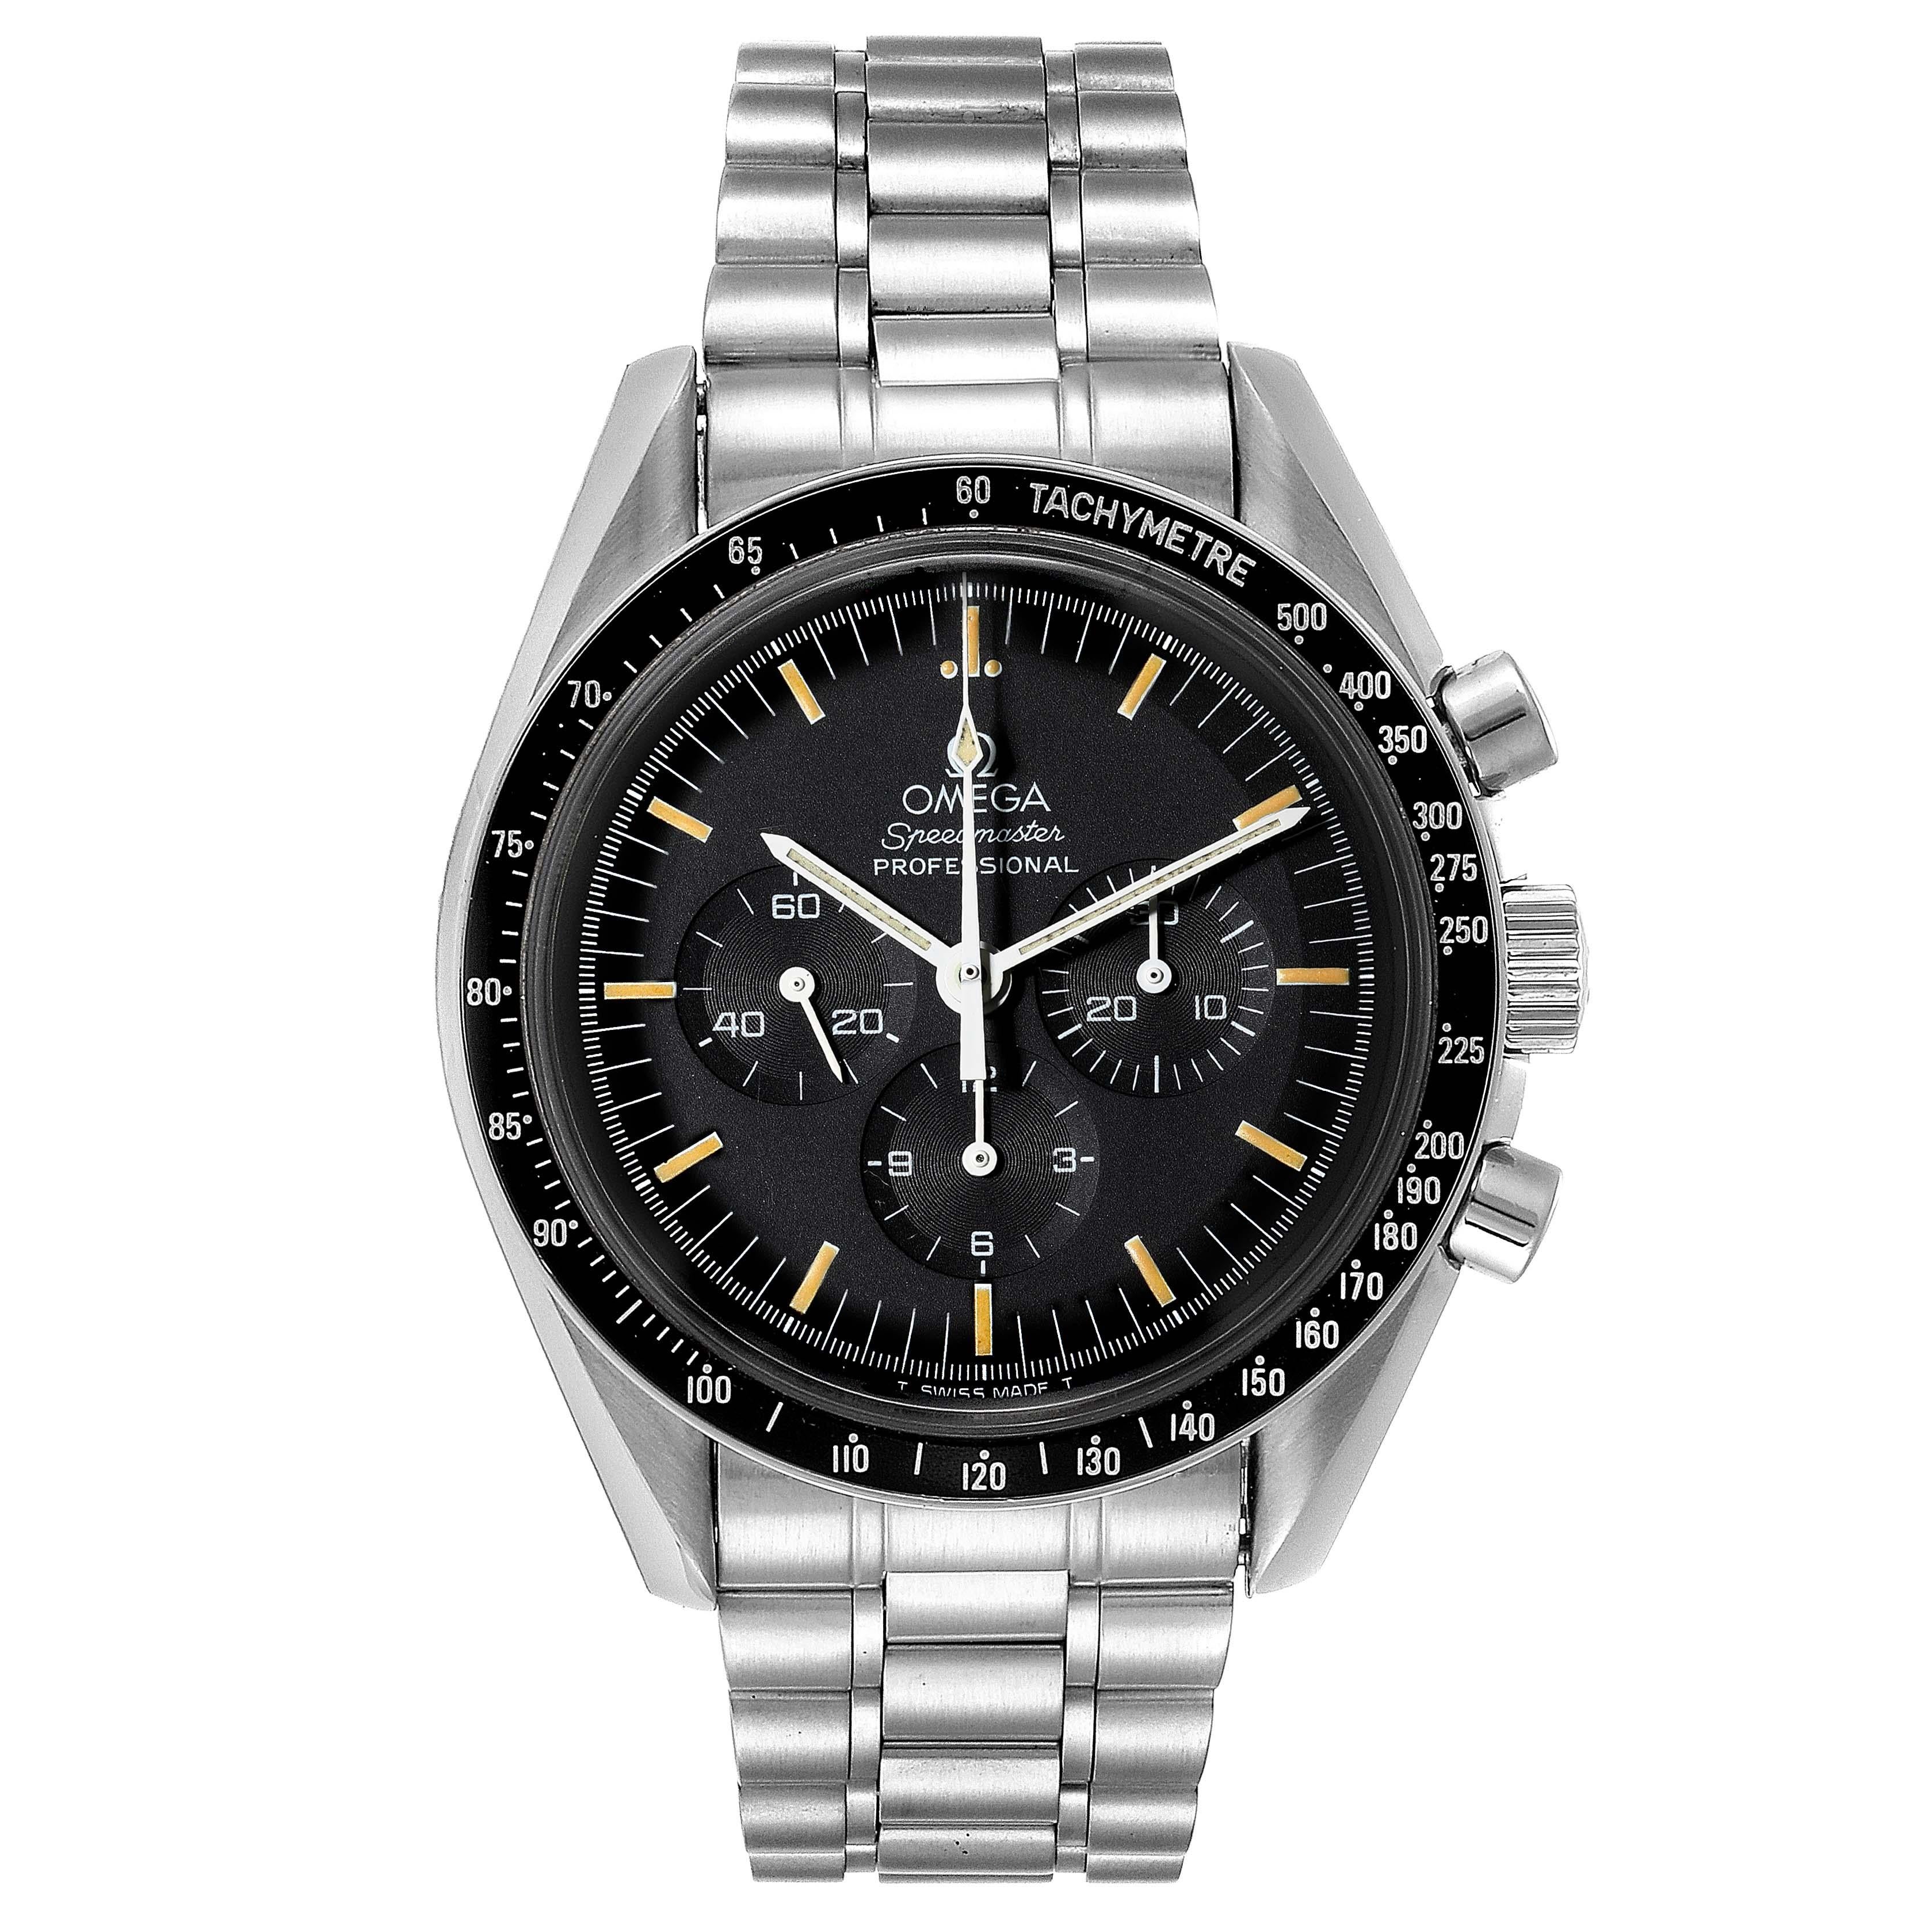 Omega Speedmaster Professional Moon Mens Watch 3592.50.00. Manual winding chronograph movement. Stainless steel round case 42.0 mm in diameter. Exhibition case back. Black bezel with tachymeter function. Hesalite crystal. Black dial with indexes and